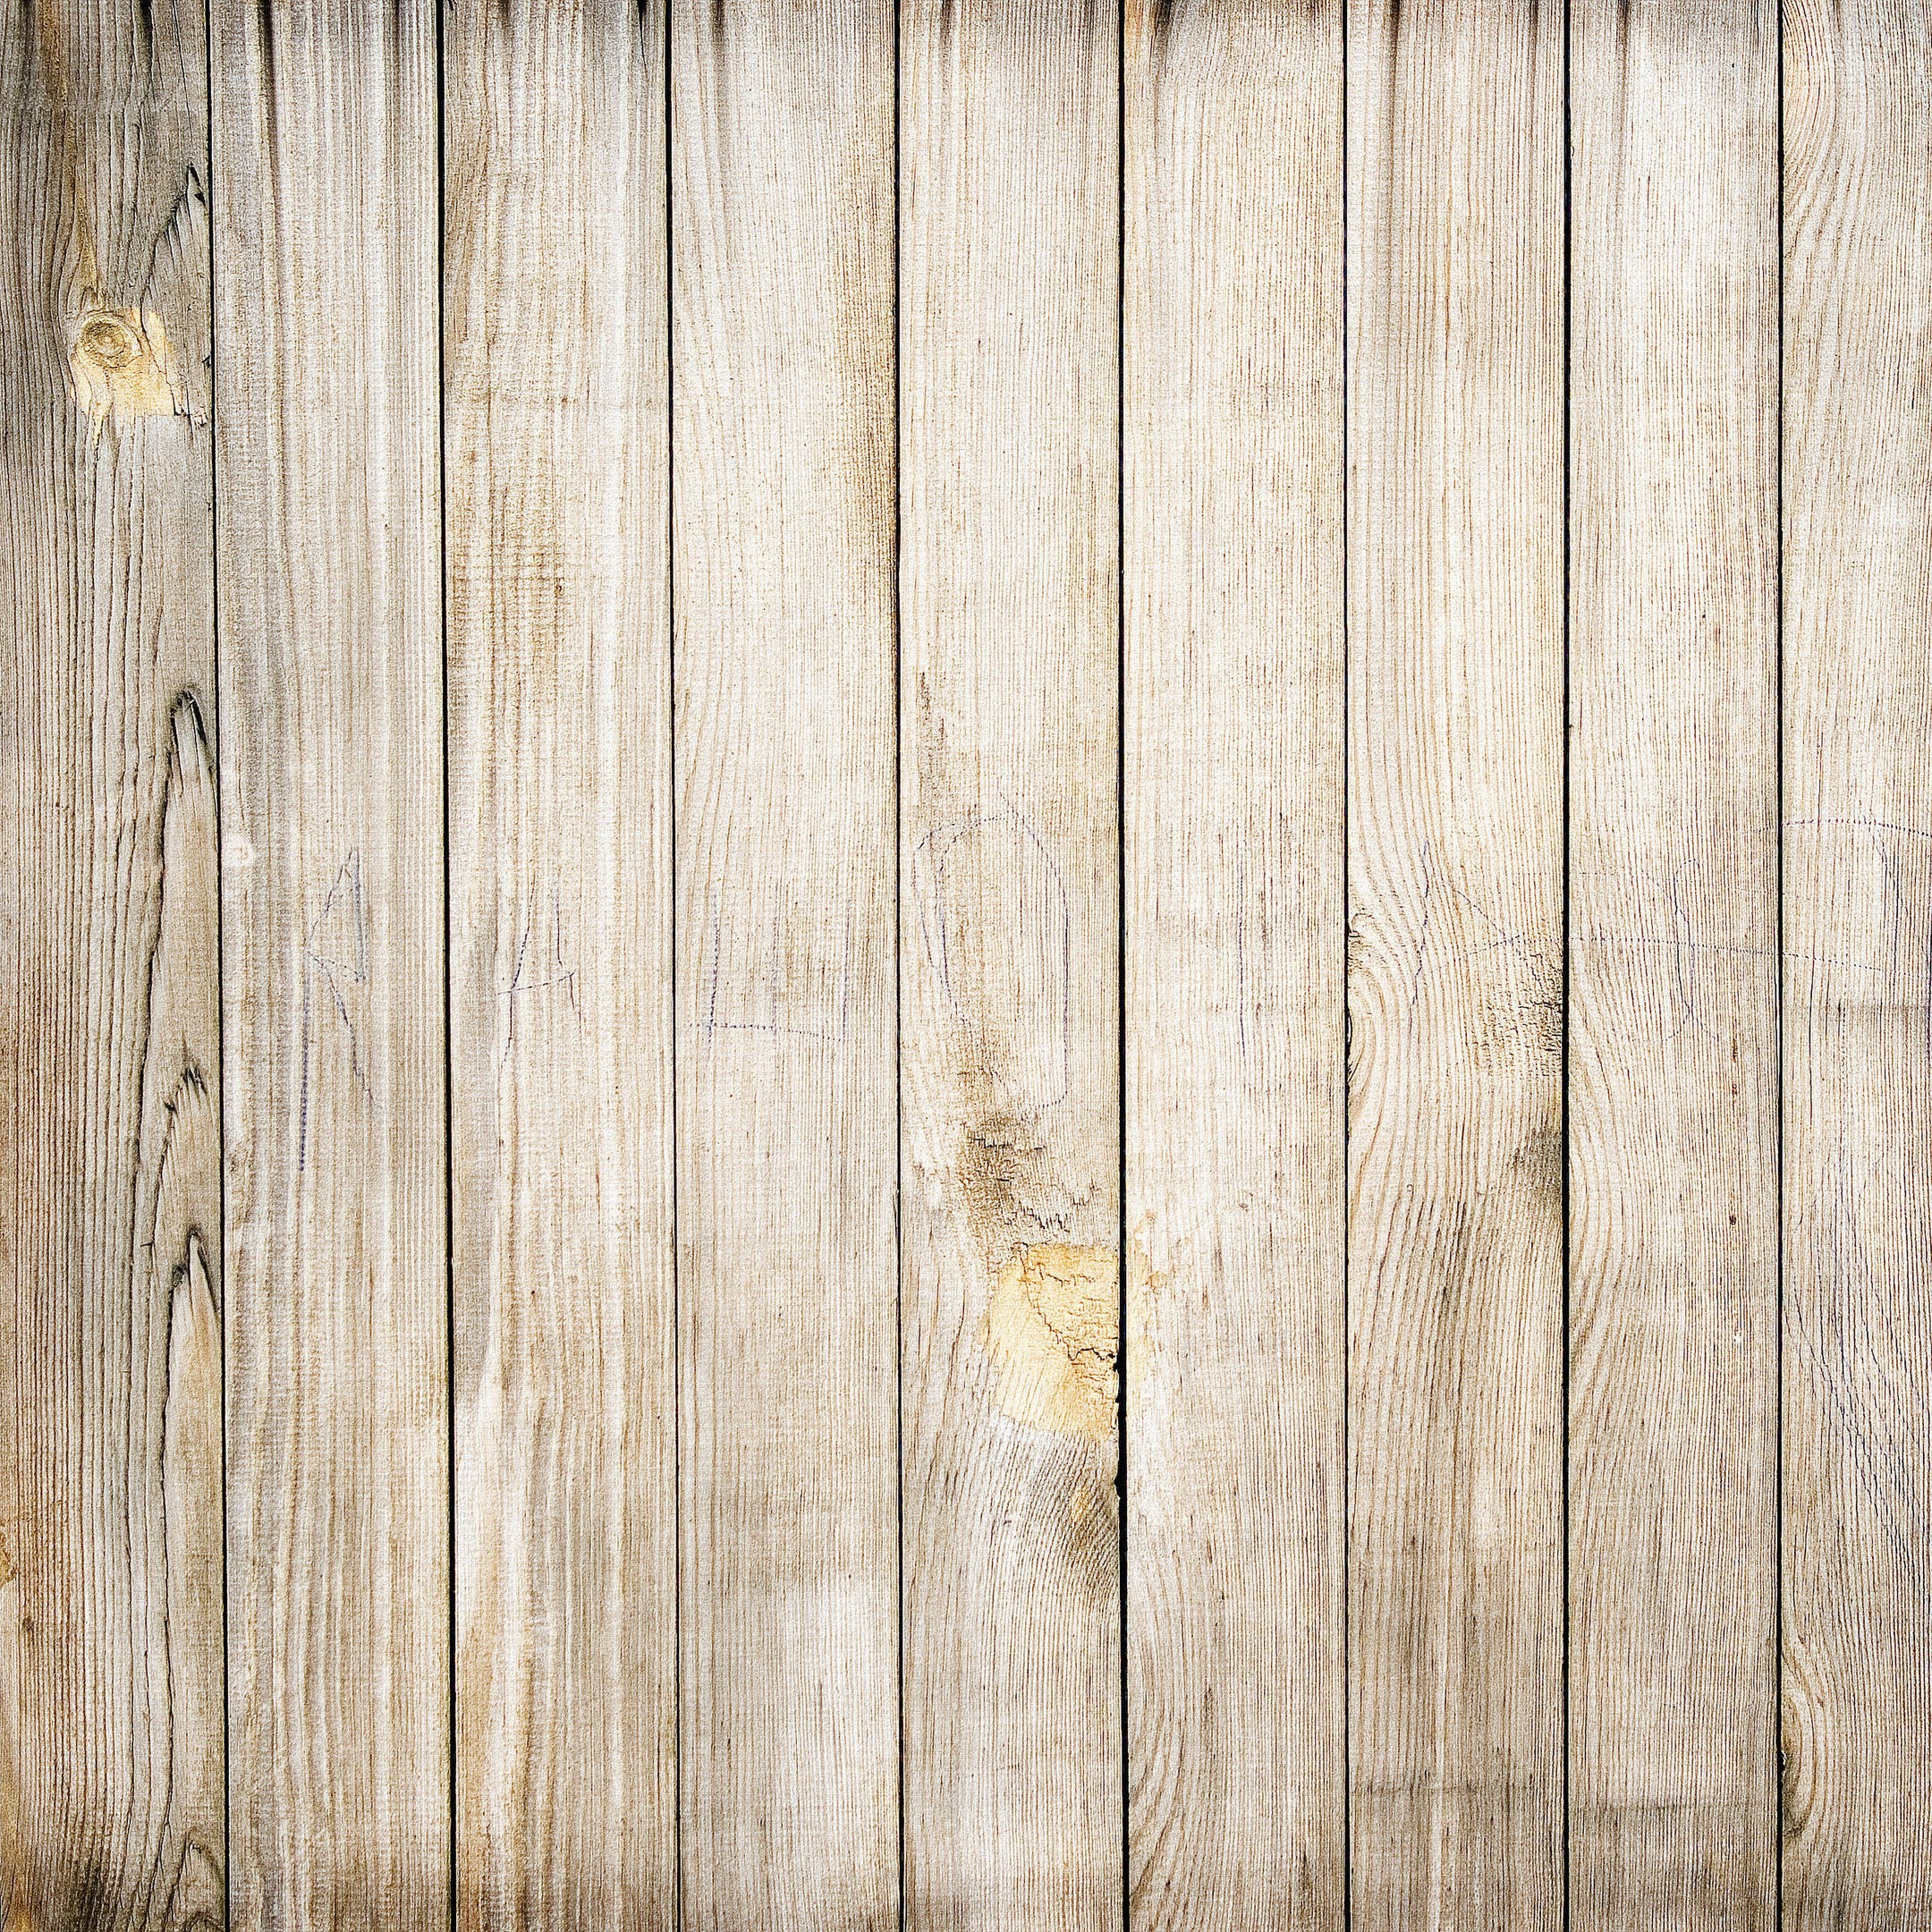 background-texture-white-wood-free-24-white-wood-texture-designs-in